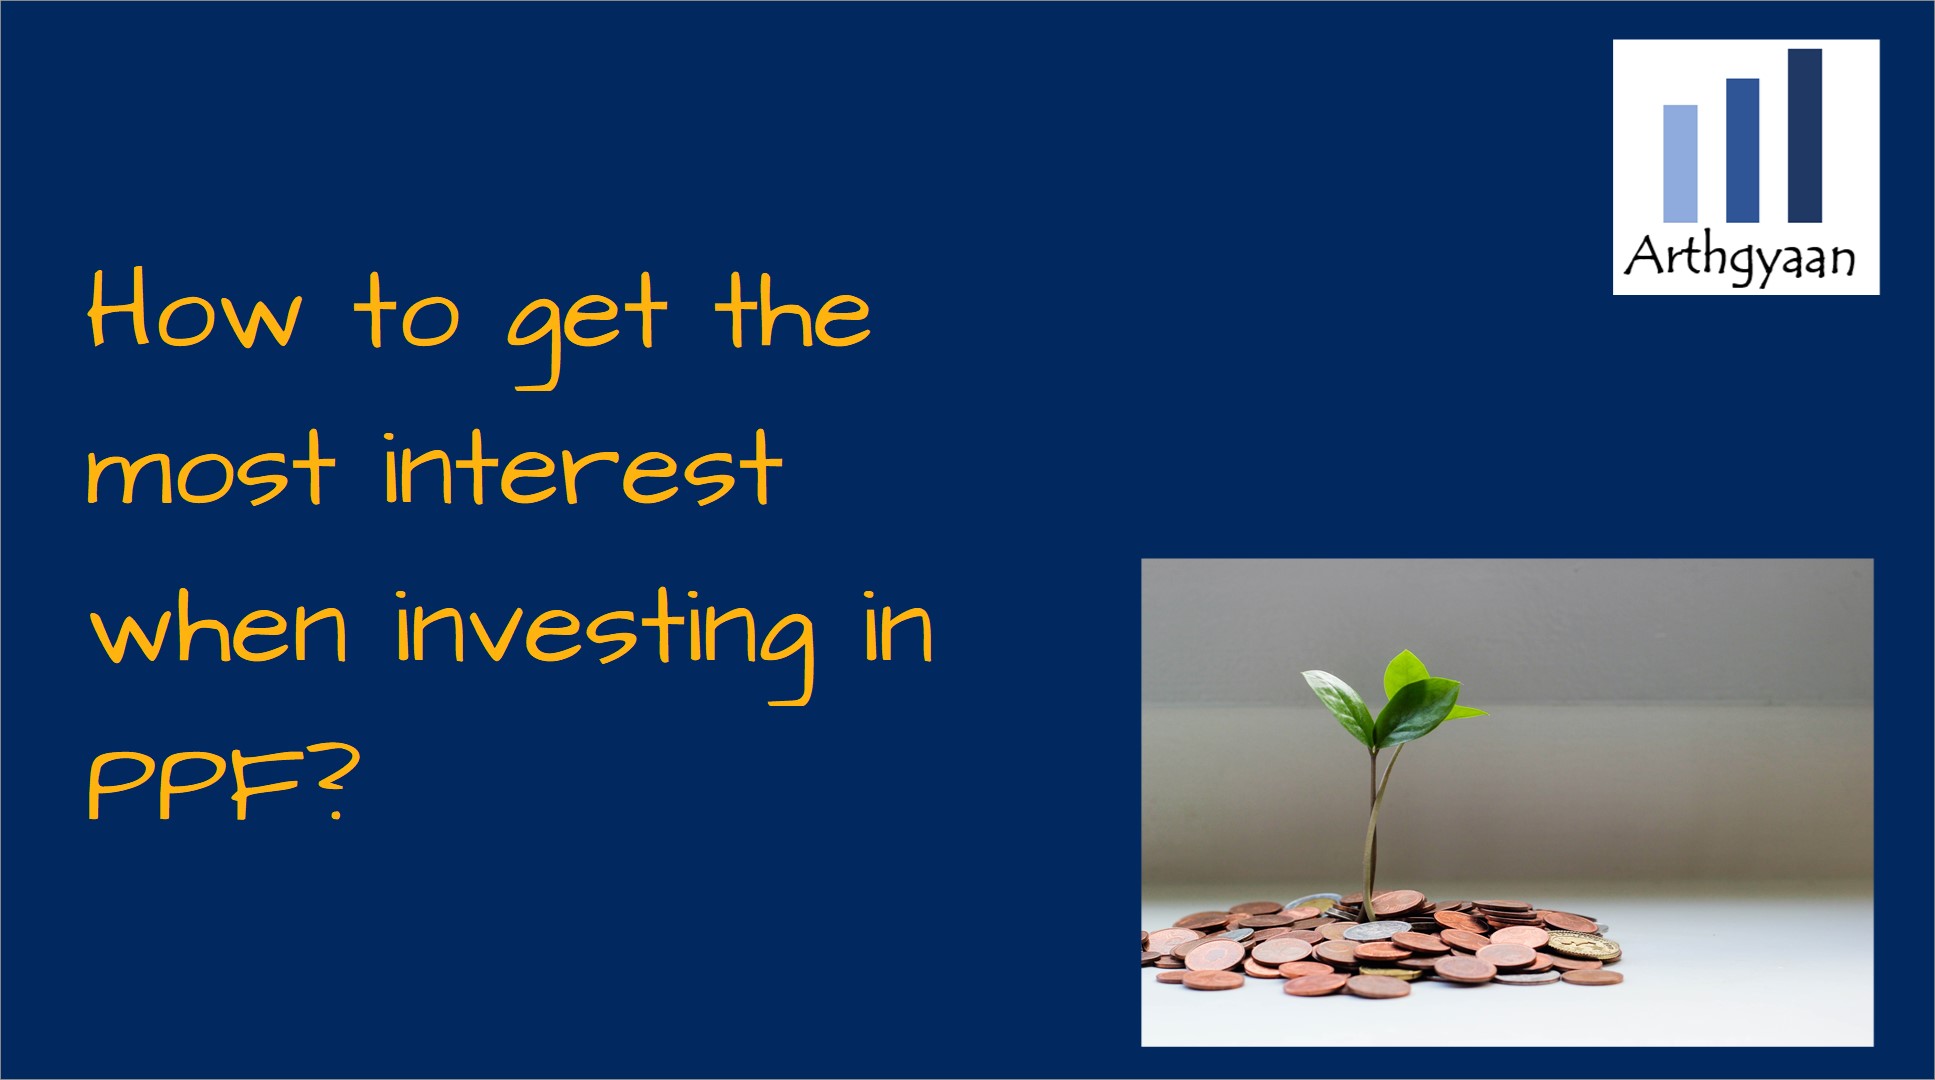 <p>This article compares the various ways of investing in PPF to show which gives the most interest.</p>

